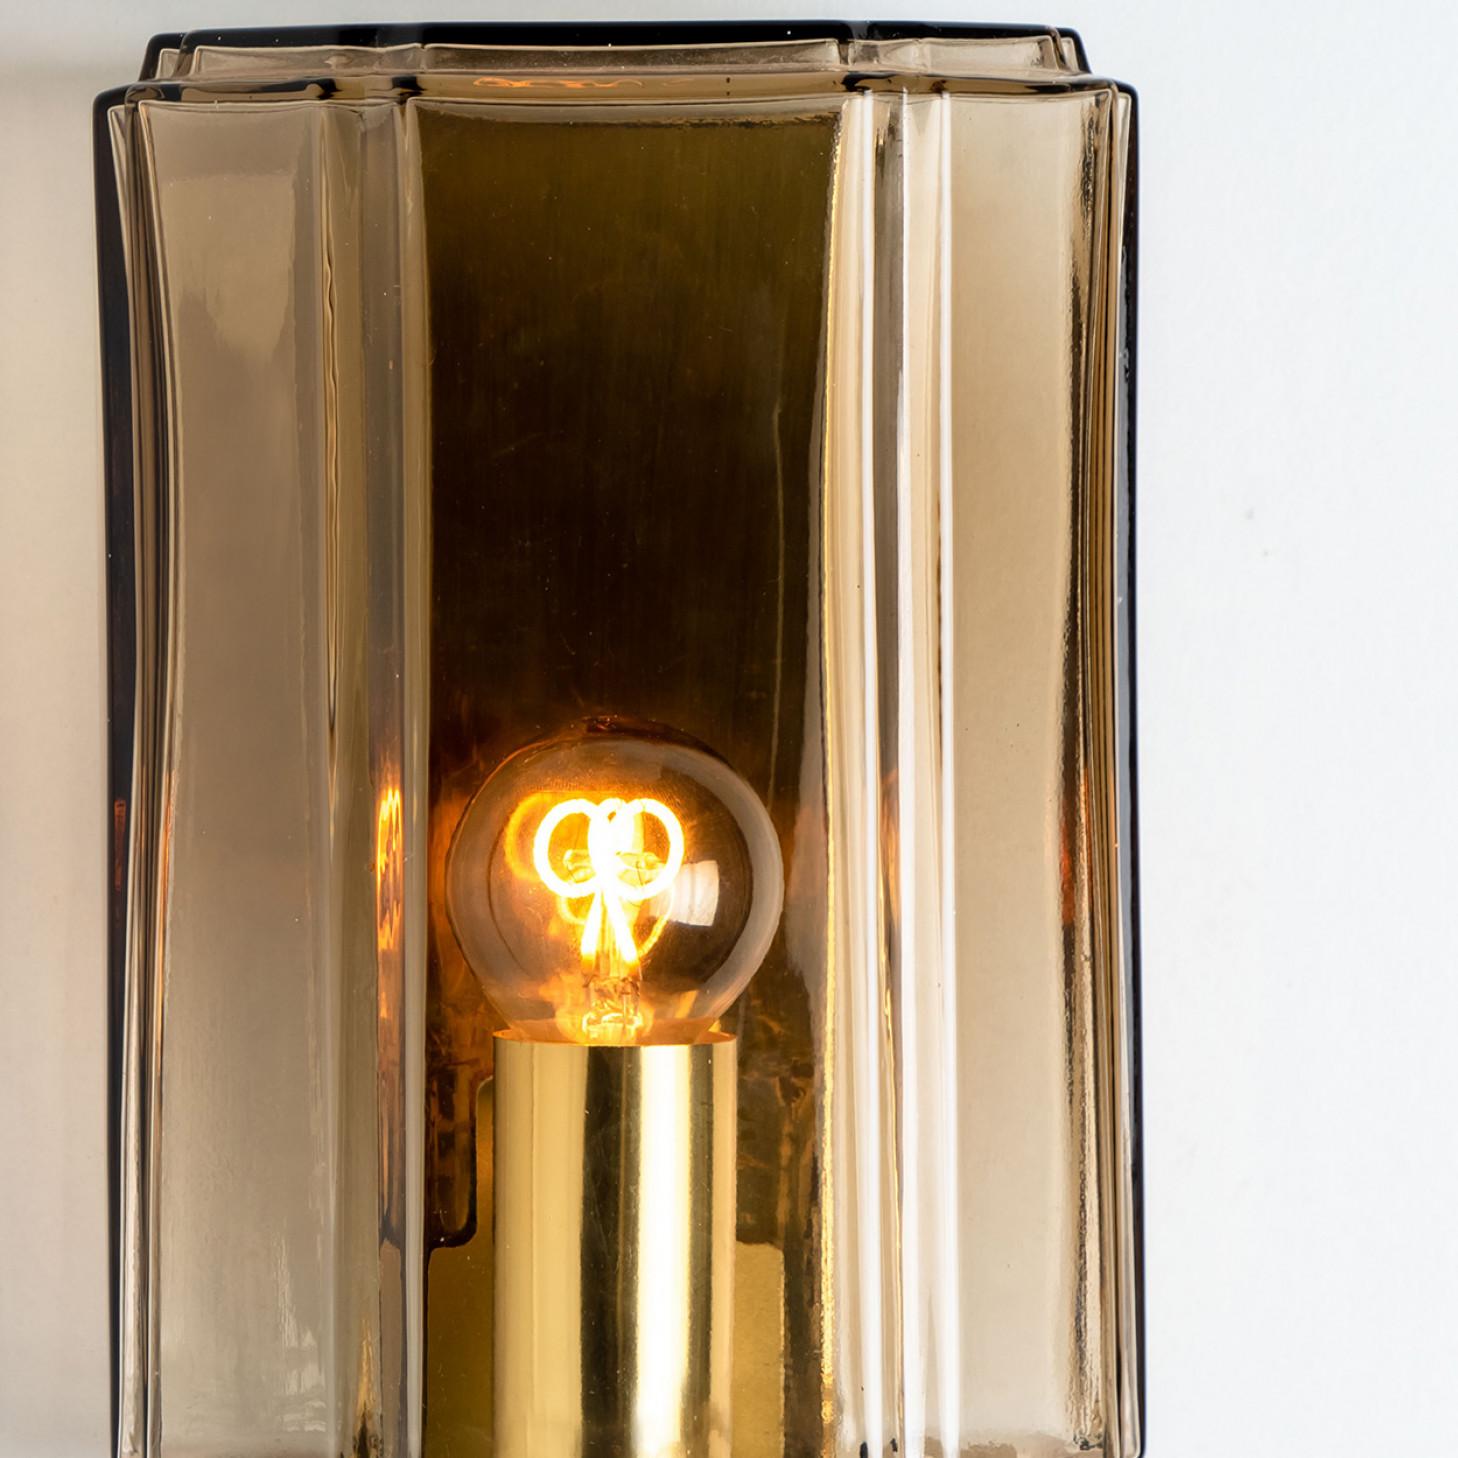 Several Smoked Glass Wall Lights Sconces by Glashütte Limburg, Germany, 1960 For Sale 6